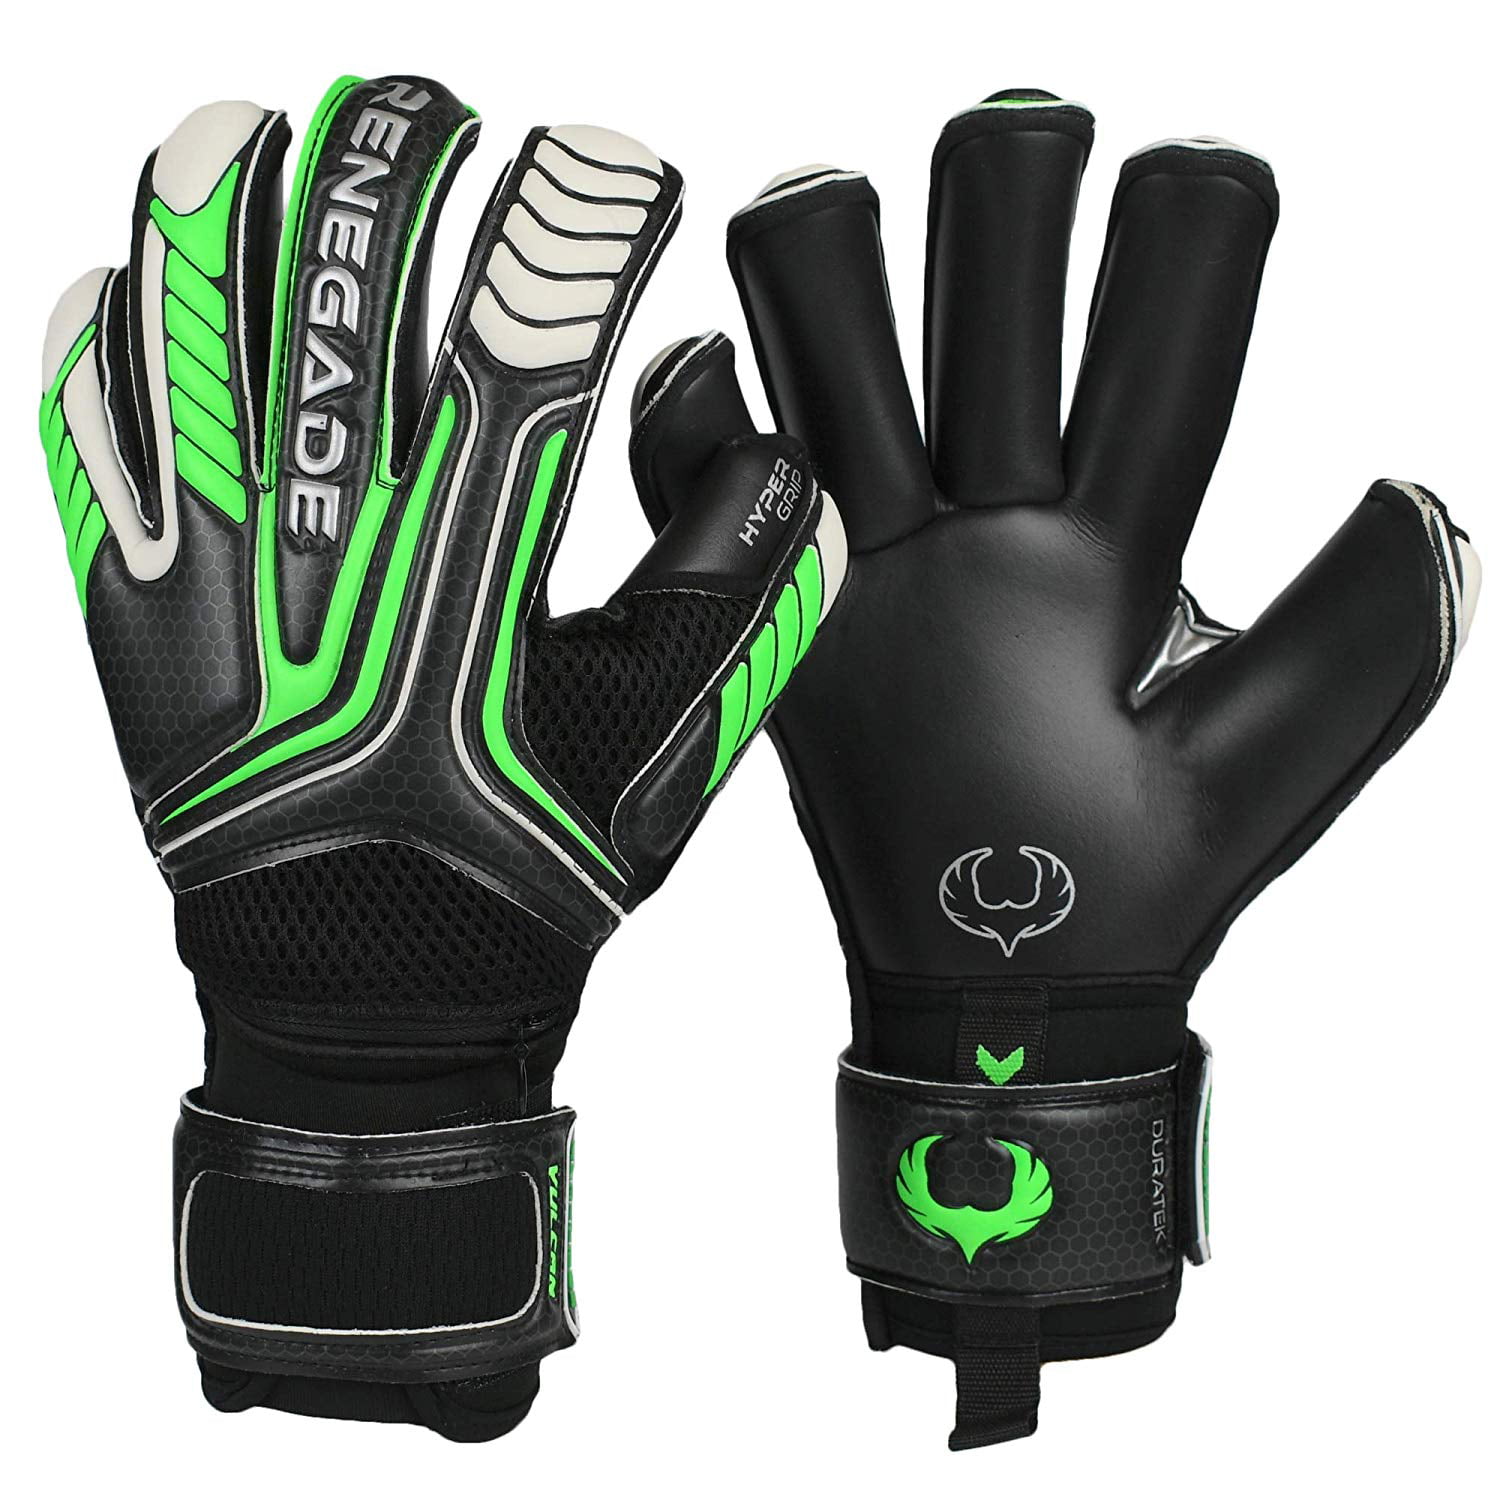 keepers Gloves Finger Save Football Goalie Flat Cut Gloves Size 4-11 